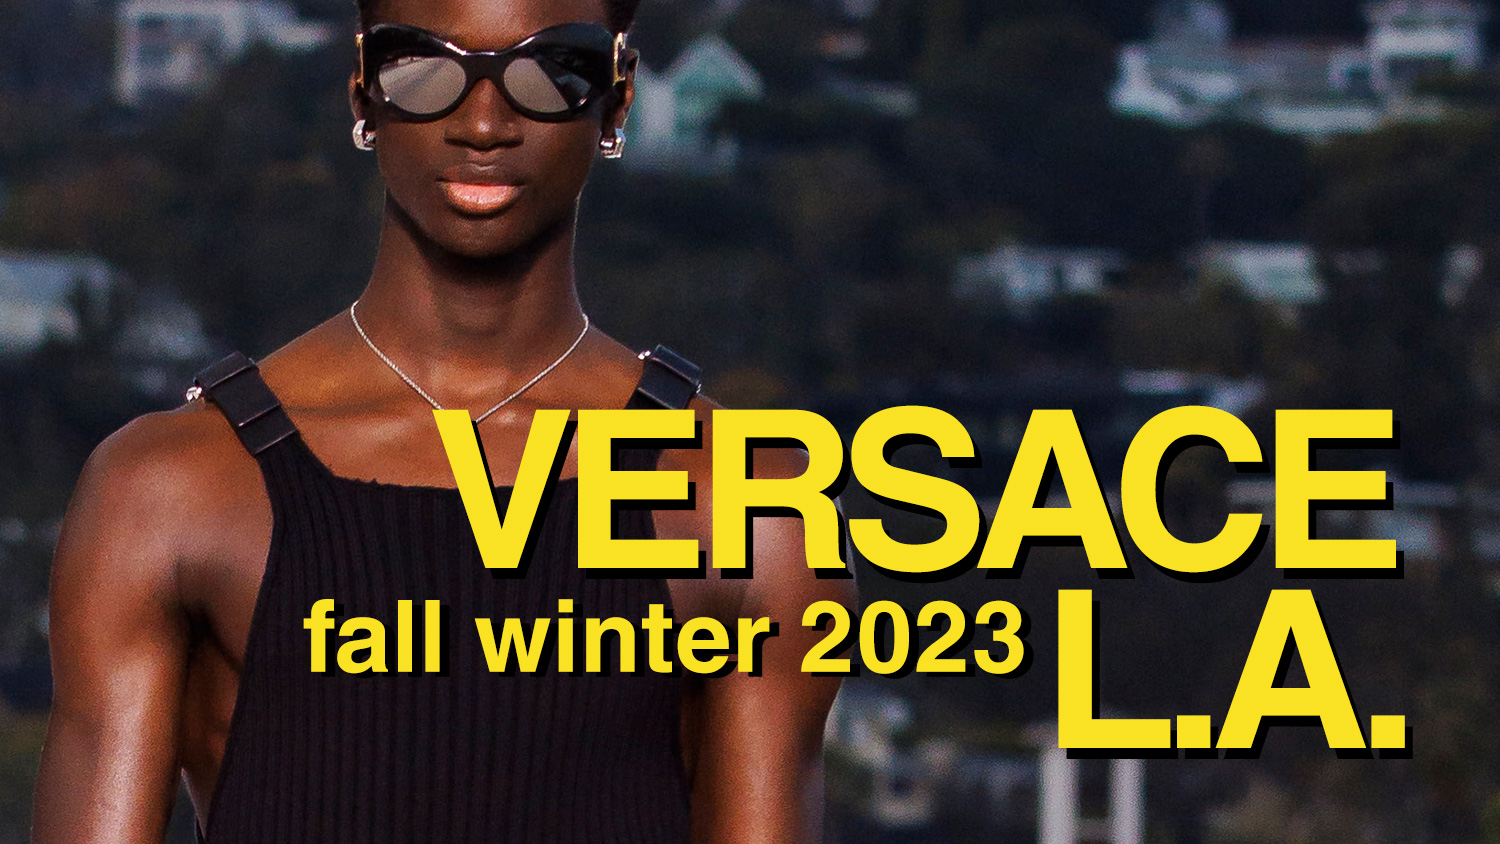 Donatella Versace Rebooted Her Menswear Collection for Gen Z